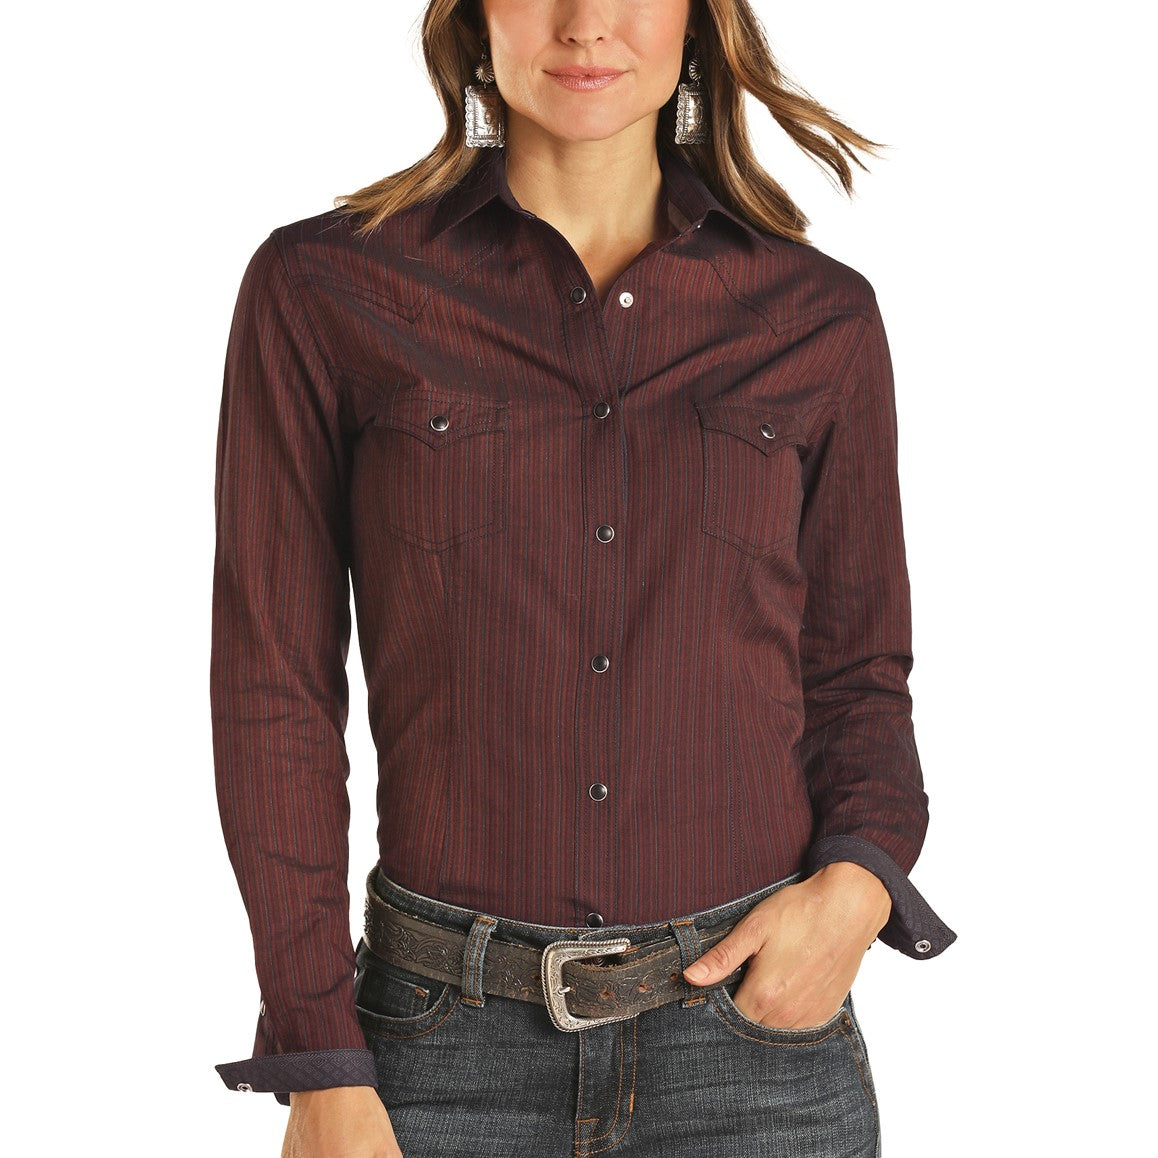 Panhandle Rough Stock Ladies Maroon Textured Dobby Snap Shirt R4S2507